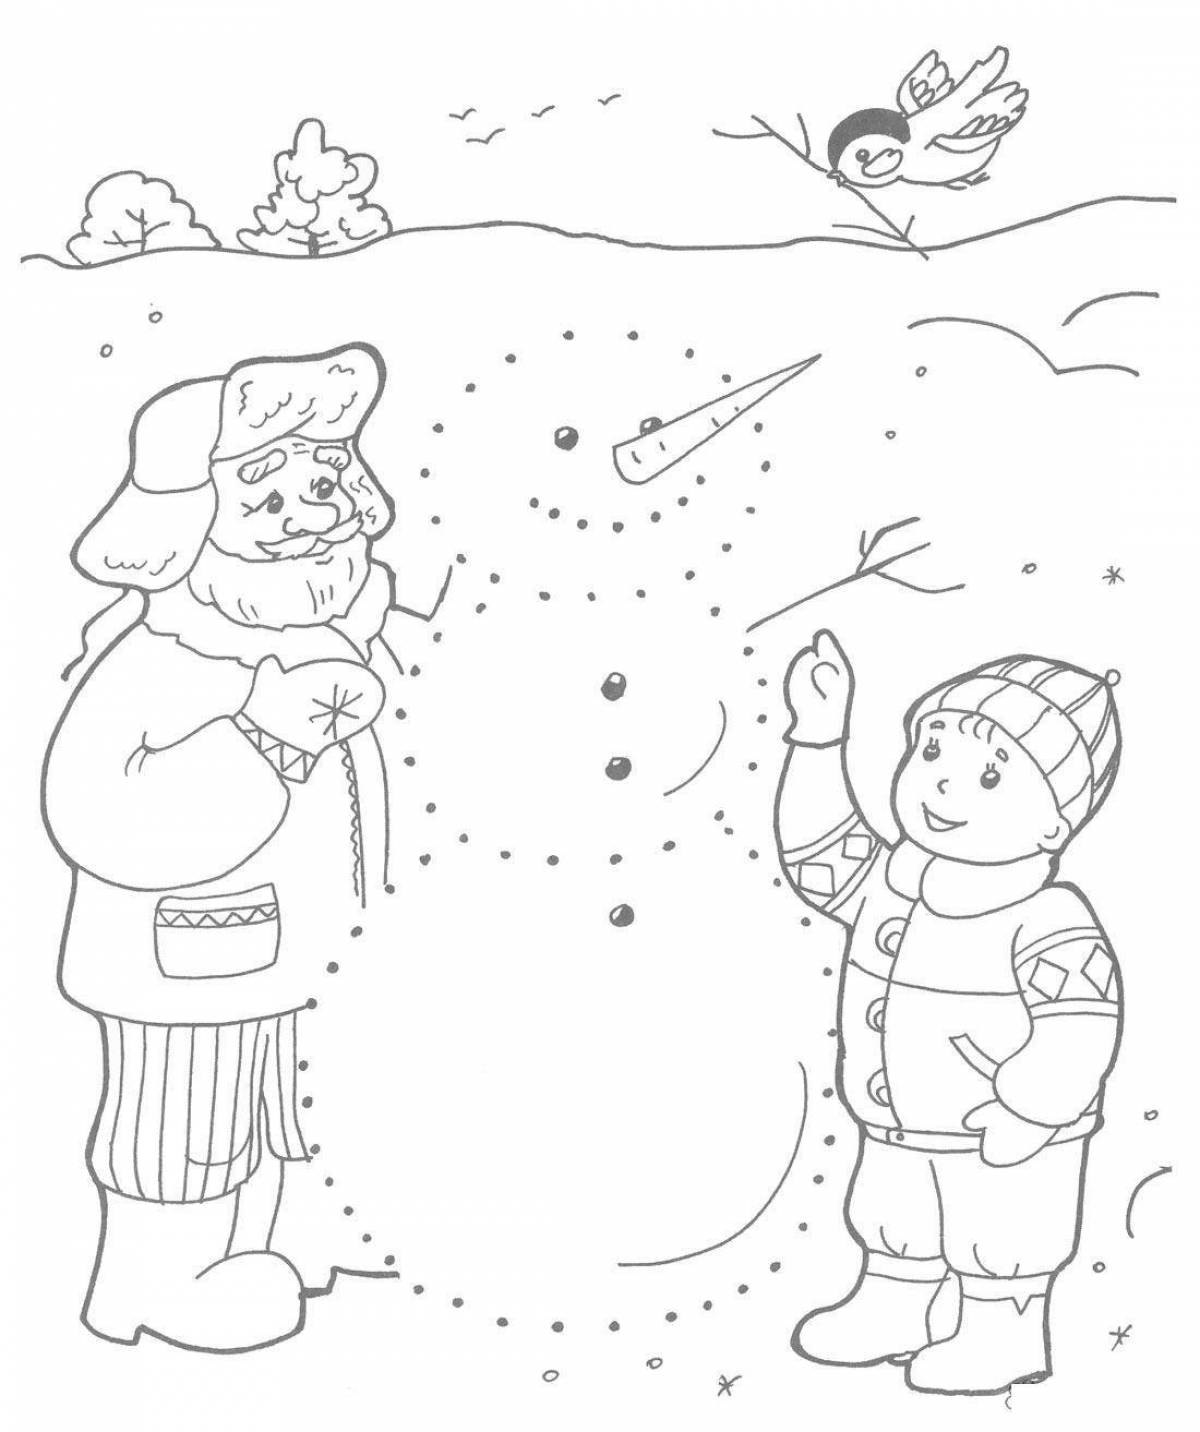 Live coloring winter for children 5-6 years old